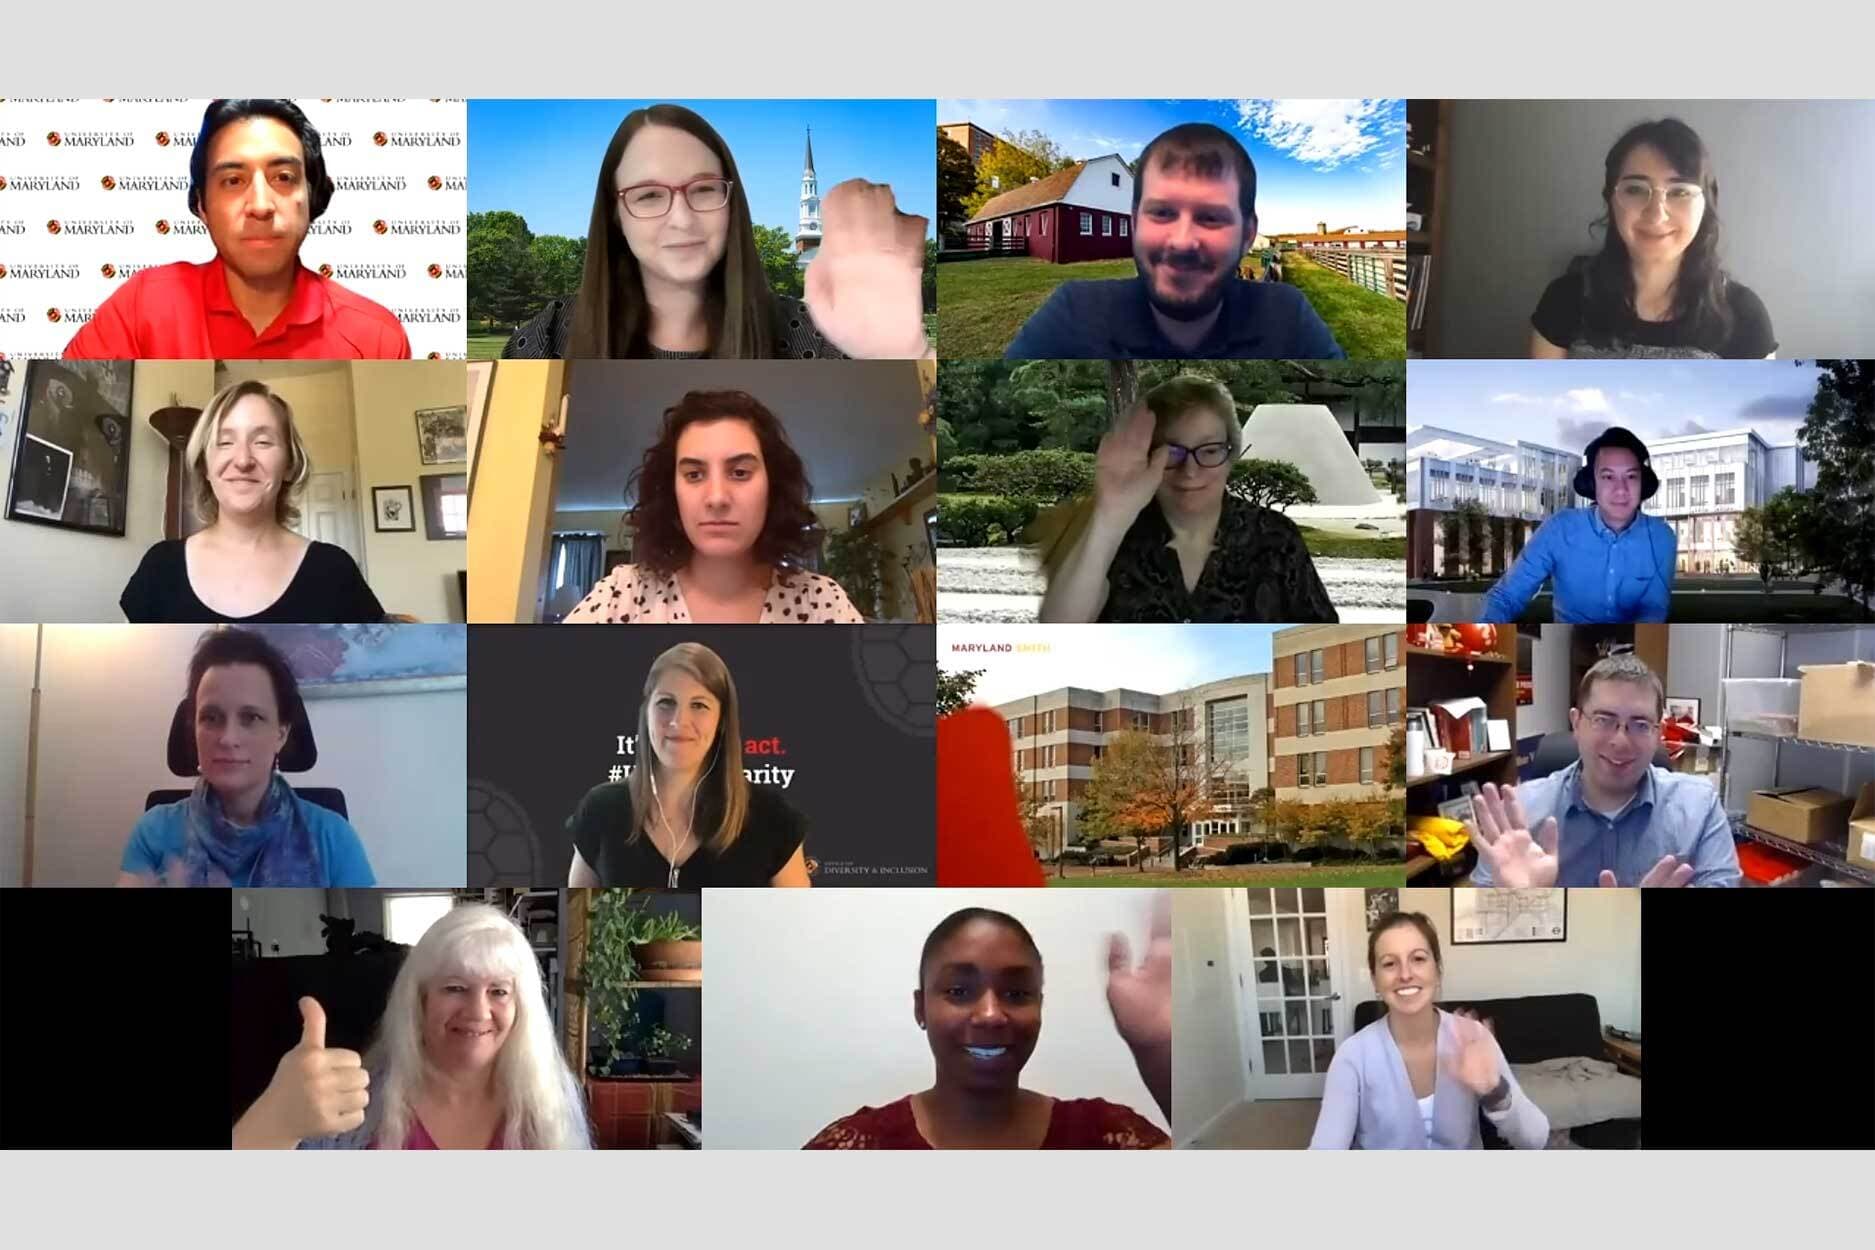 Screenshot of the Zoom attendees to the UMDSocial virtual event in 2021